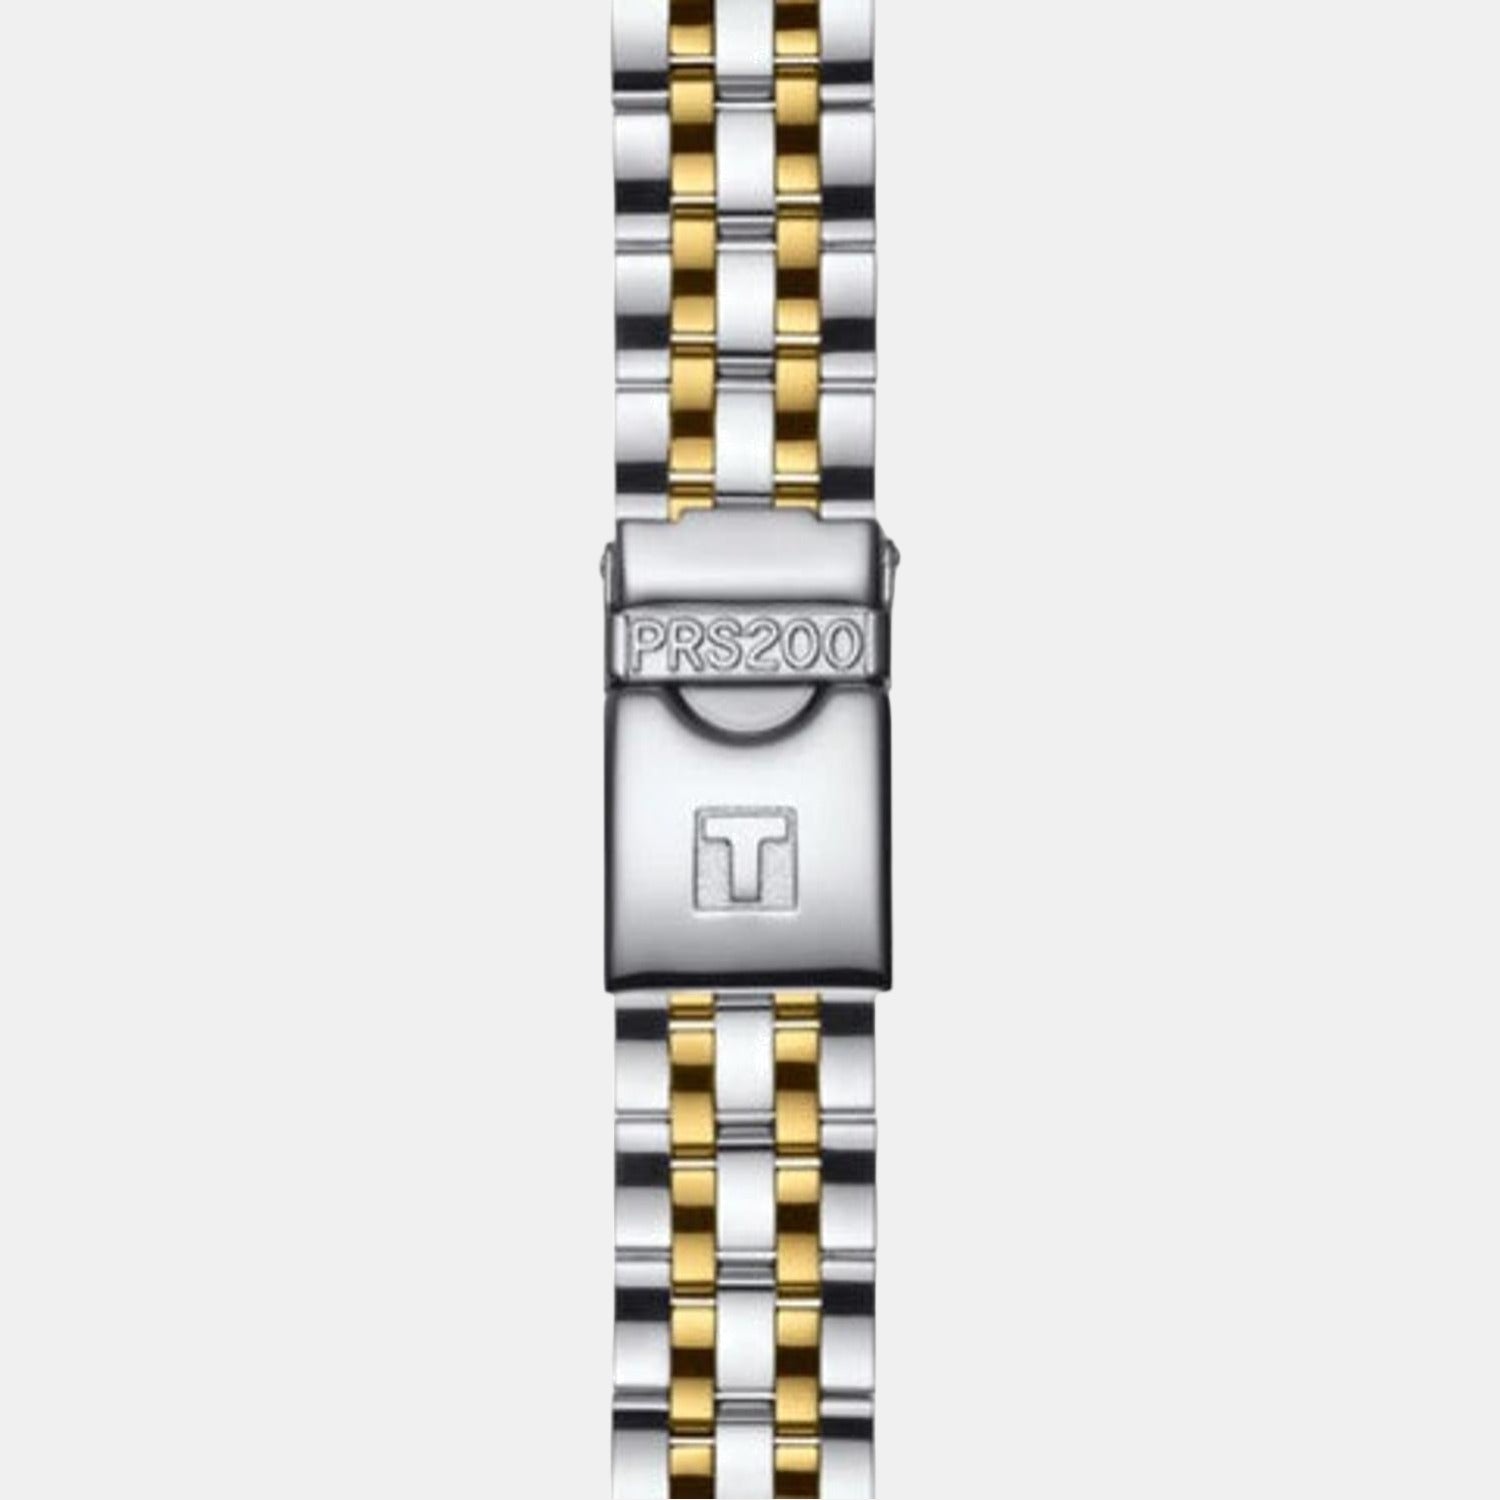 tissot-stainless-steel-white-analog-male-watch-t0674172203101